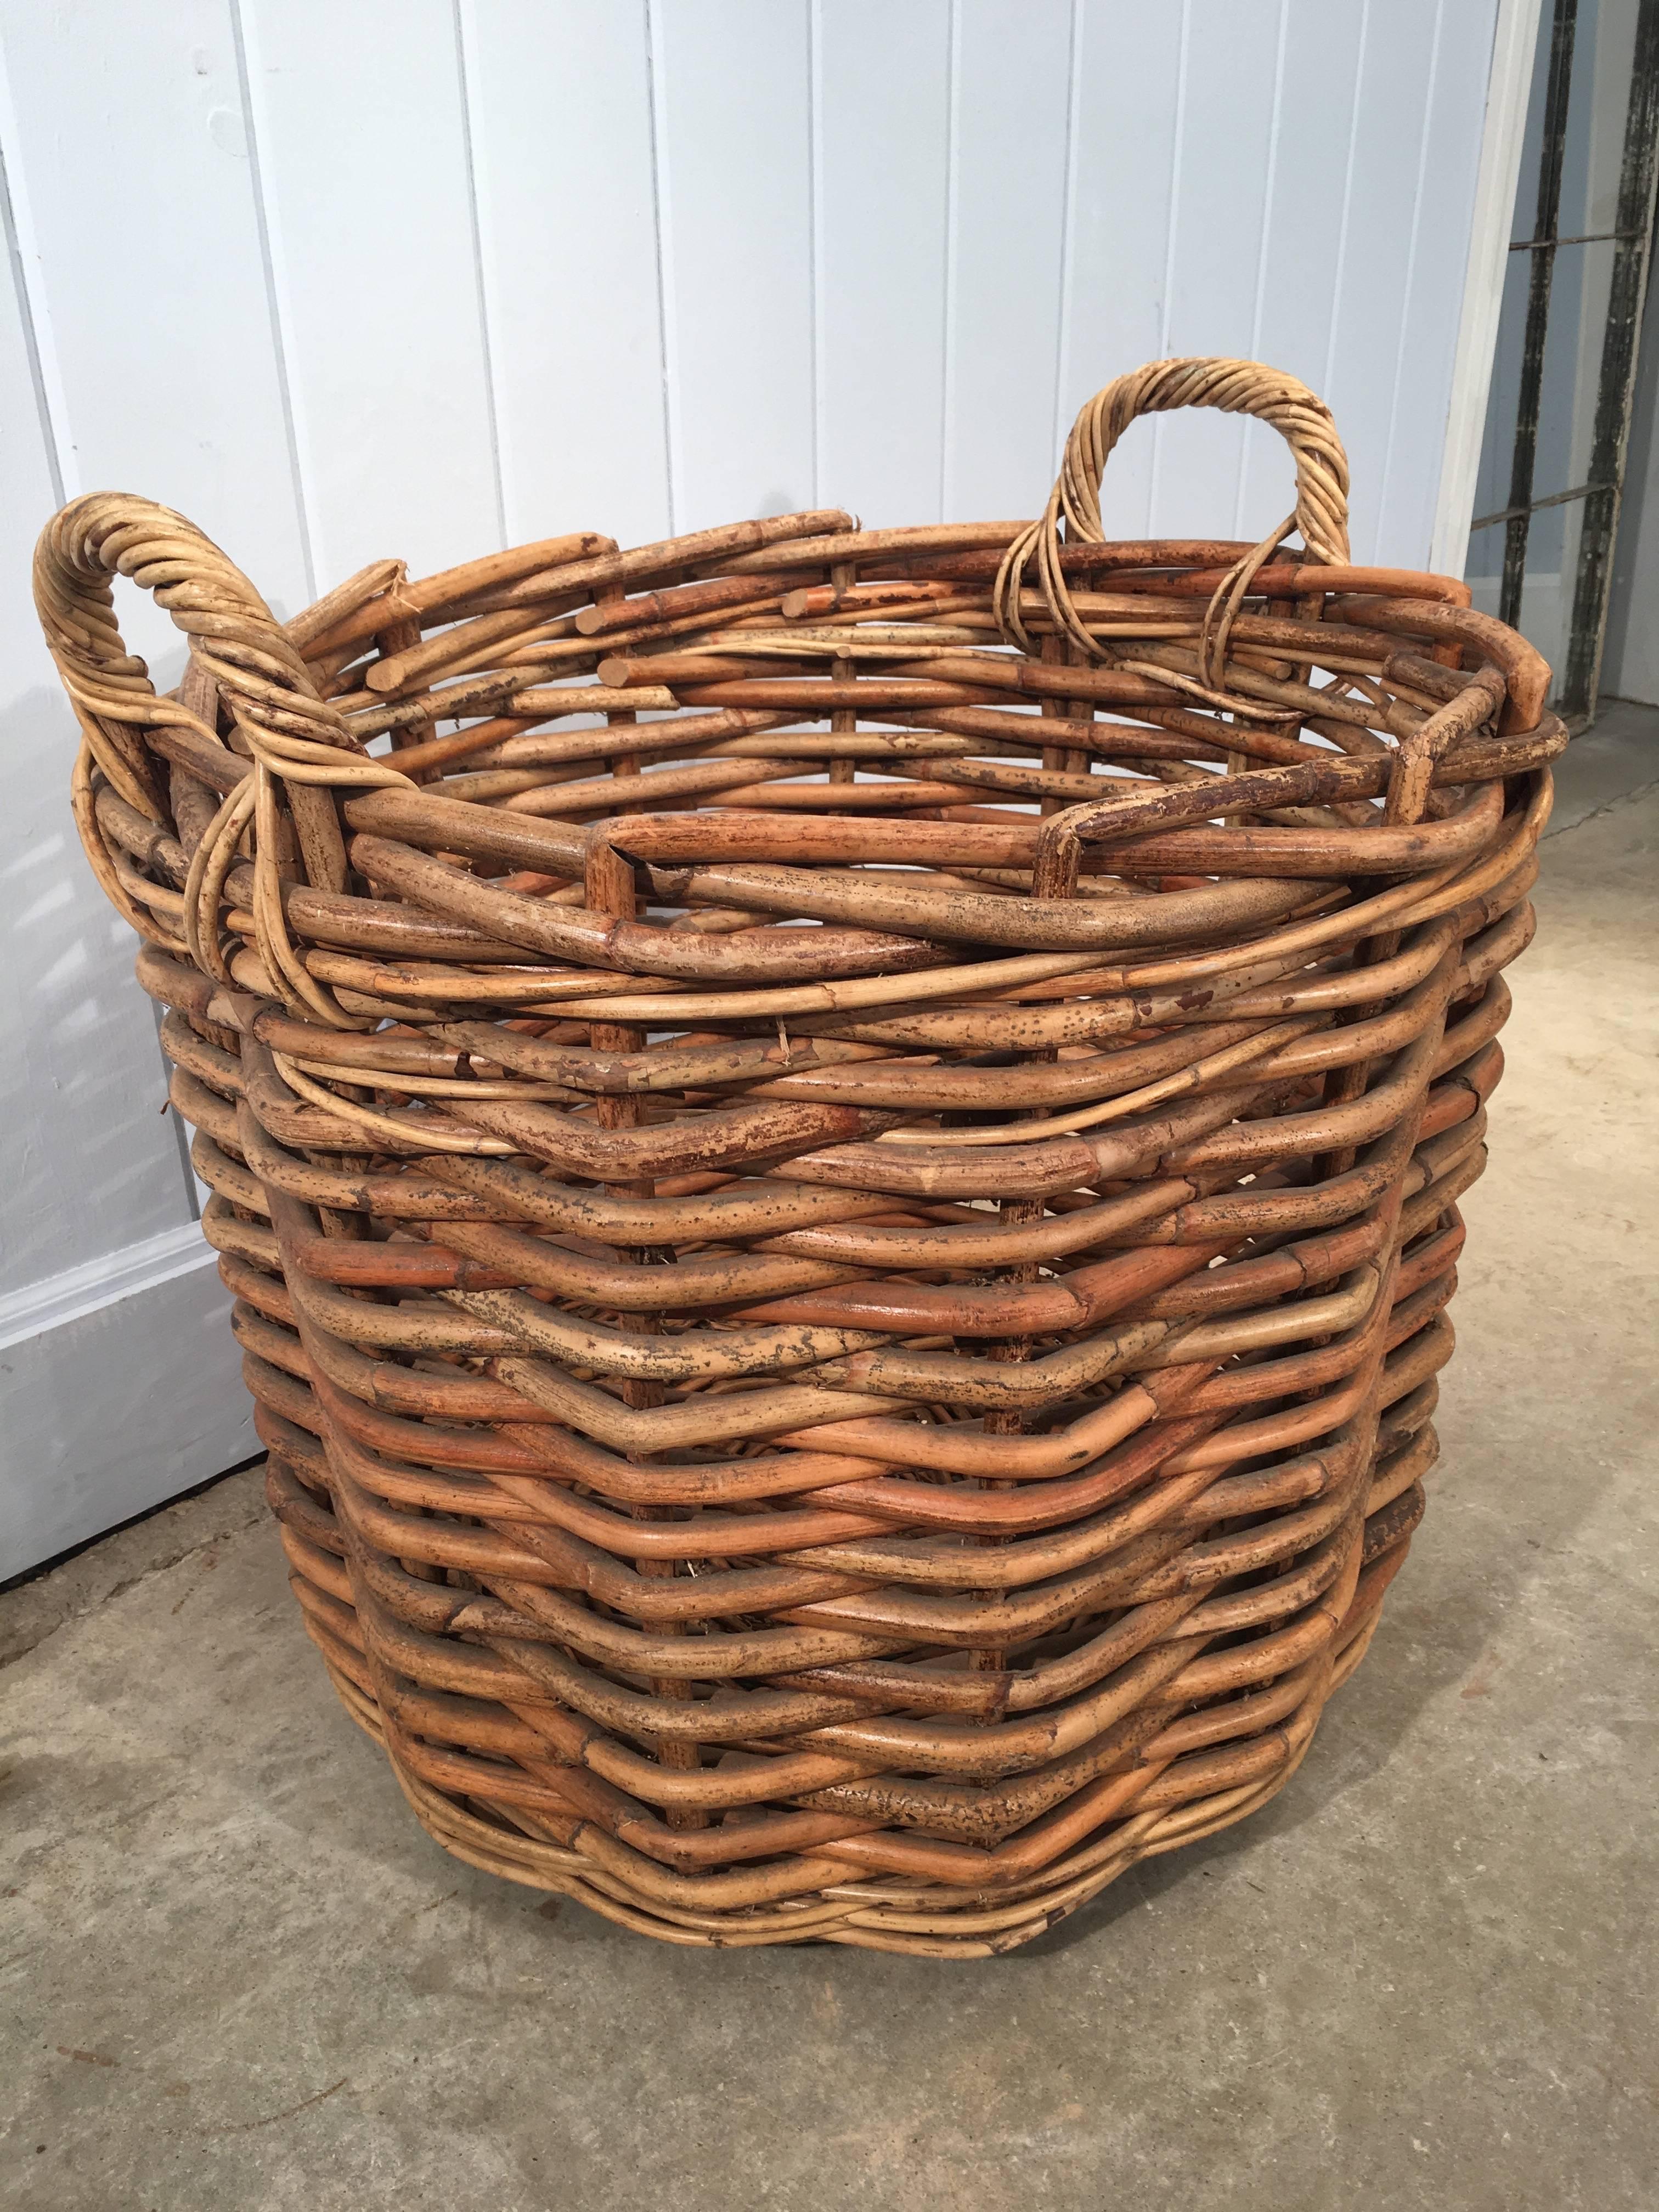 We buy old French boulangerie baskets when and wherever we can find them and this one is particularly nice. Handwoven of a thick wicker, it has strong handles, a very solid bottom and a lovely warm clean patina. Great as a decorative item by the